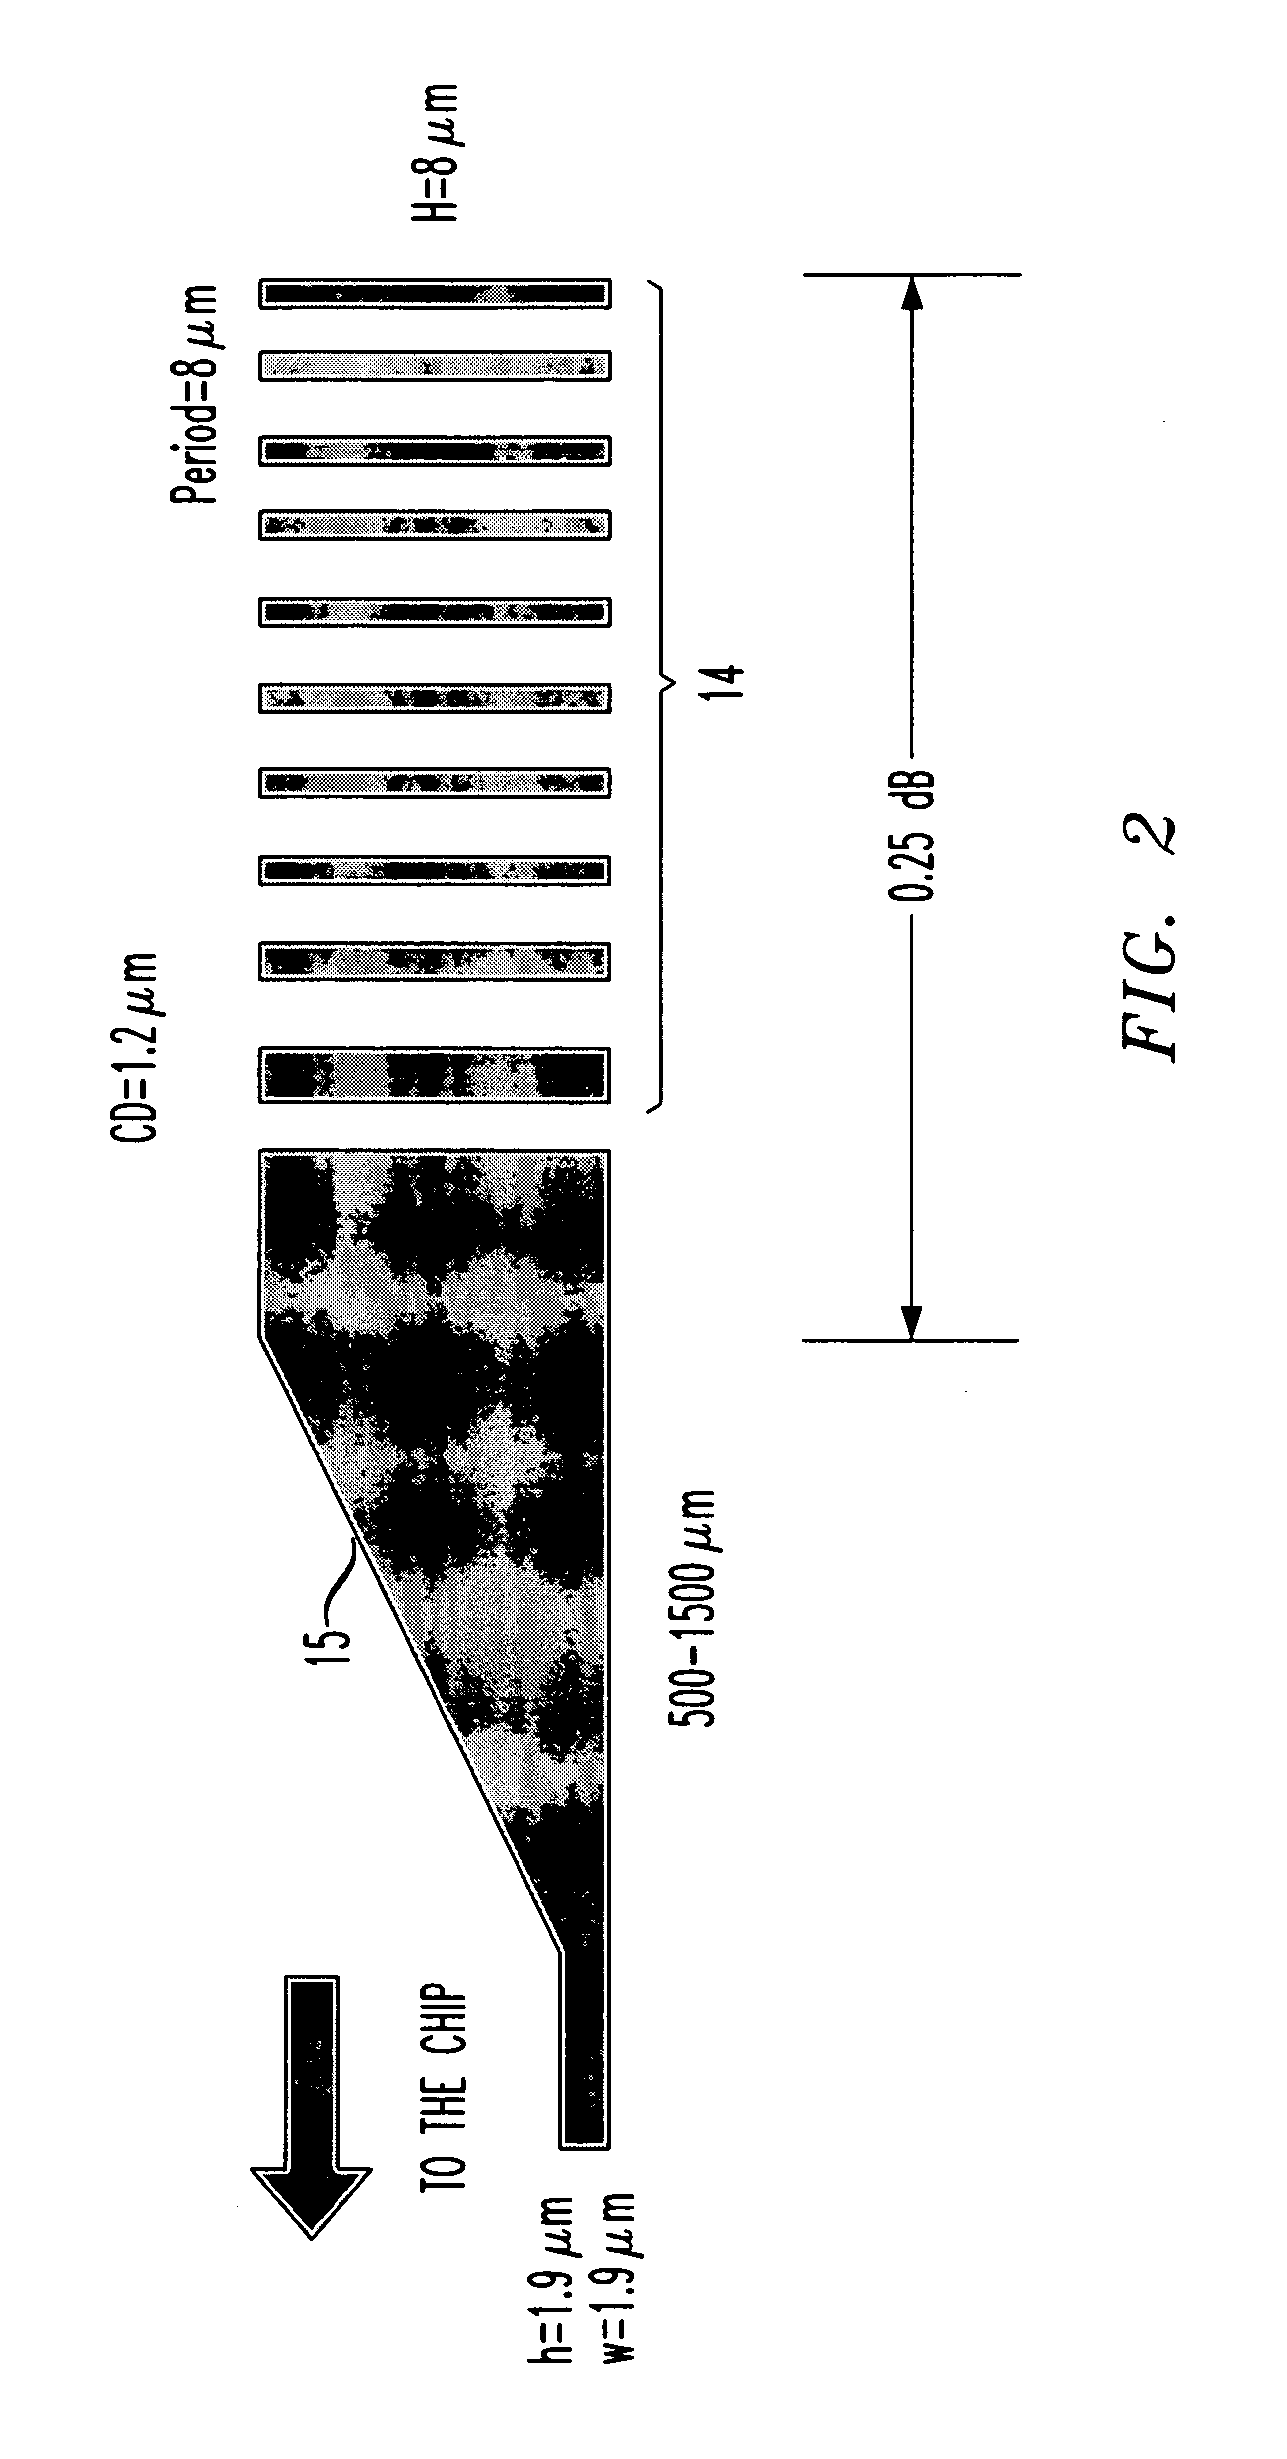 Method and apparatus for compactly coupling an optical fiber and a planar optical waveguide